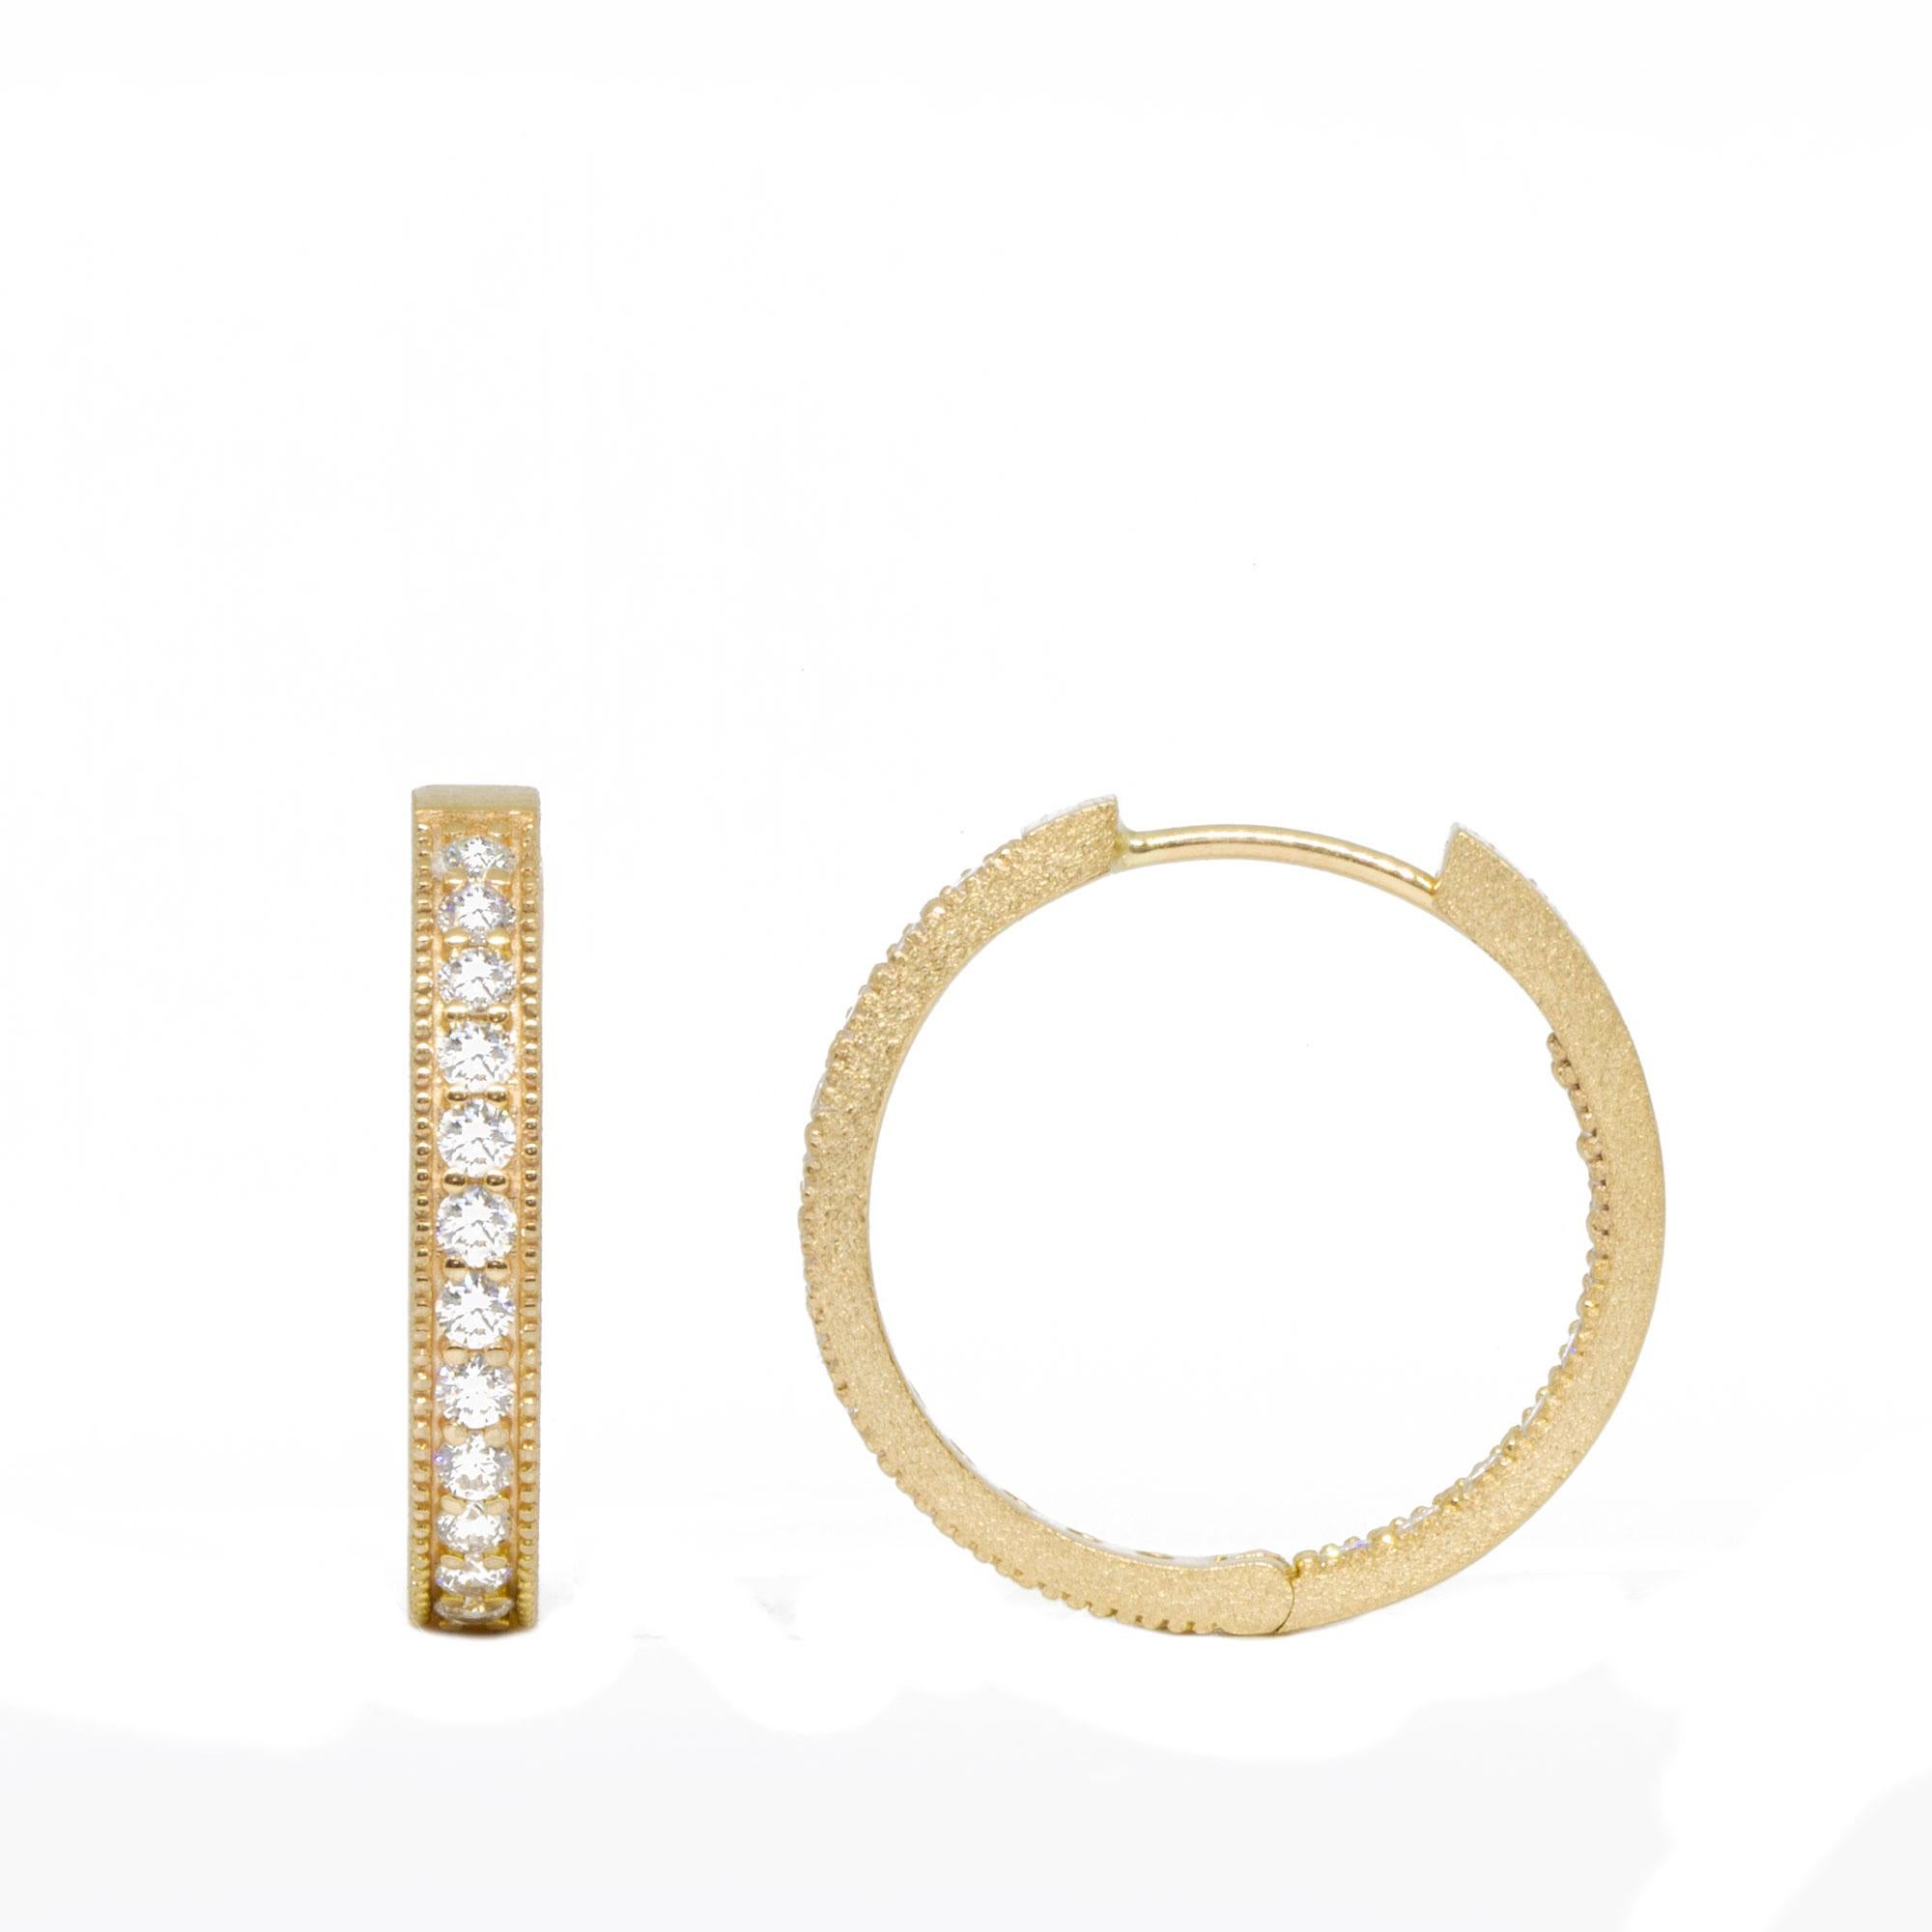 The Gemma re-define glamorous and designed to stand out, but they’re not going to bump into your face! Our collectors really love these gold hoop earrings because they’re richly detailed with intricate milgrain edges, and nice and thick for showing